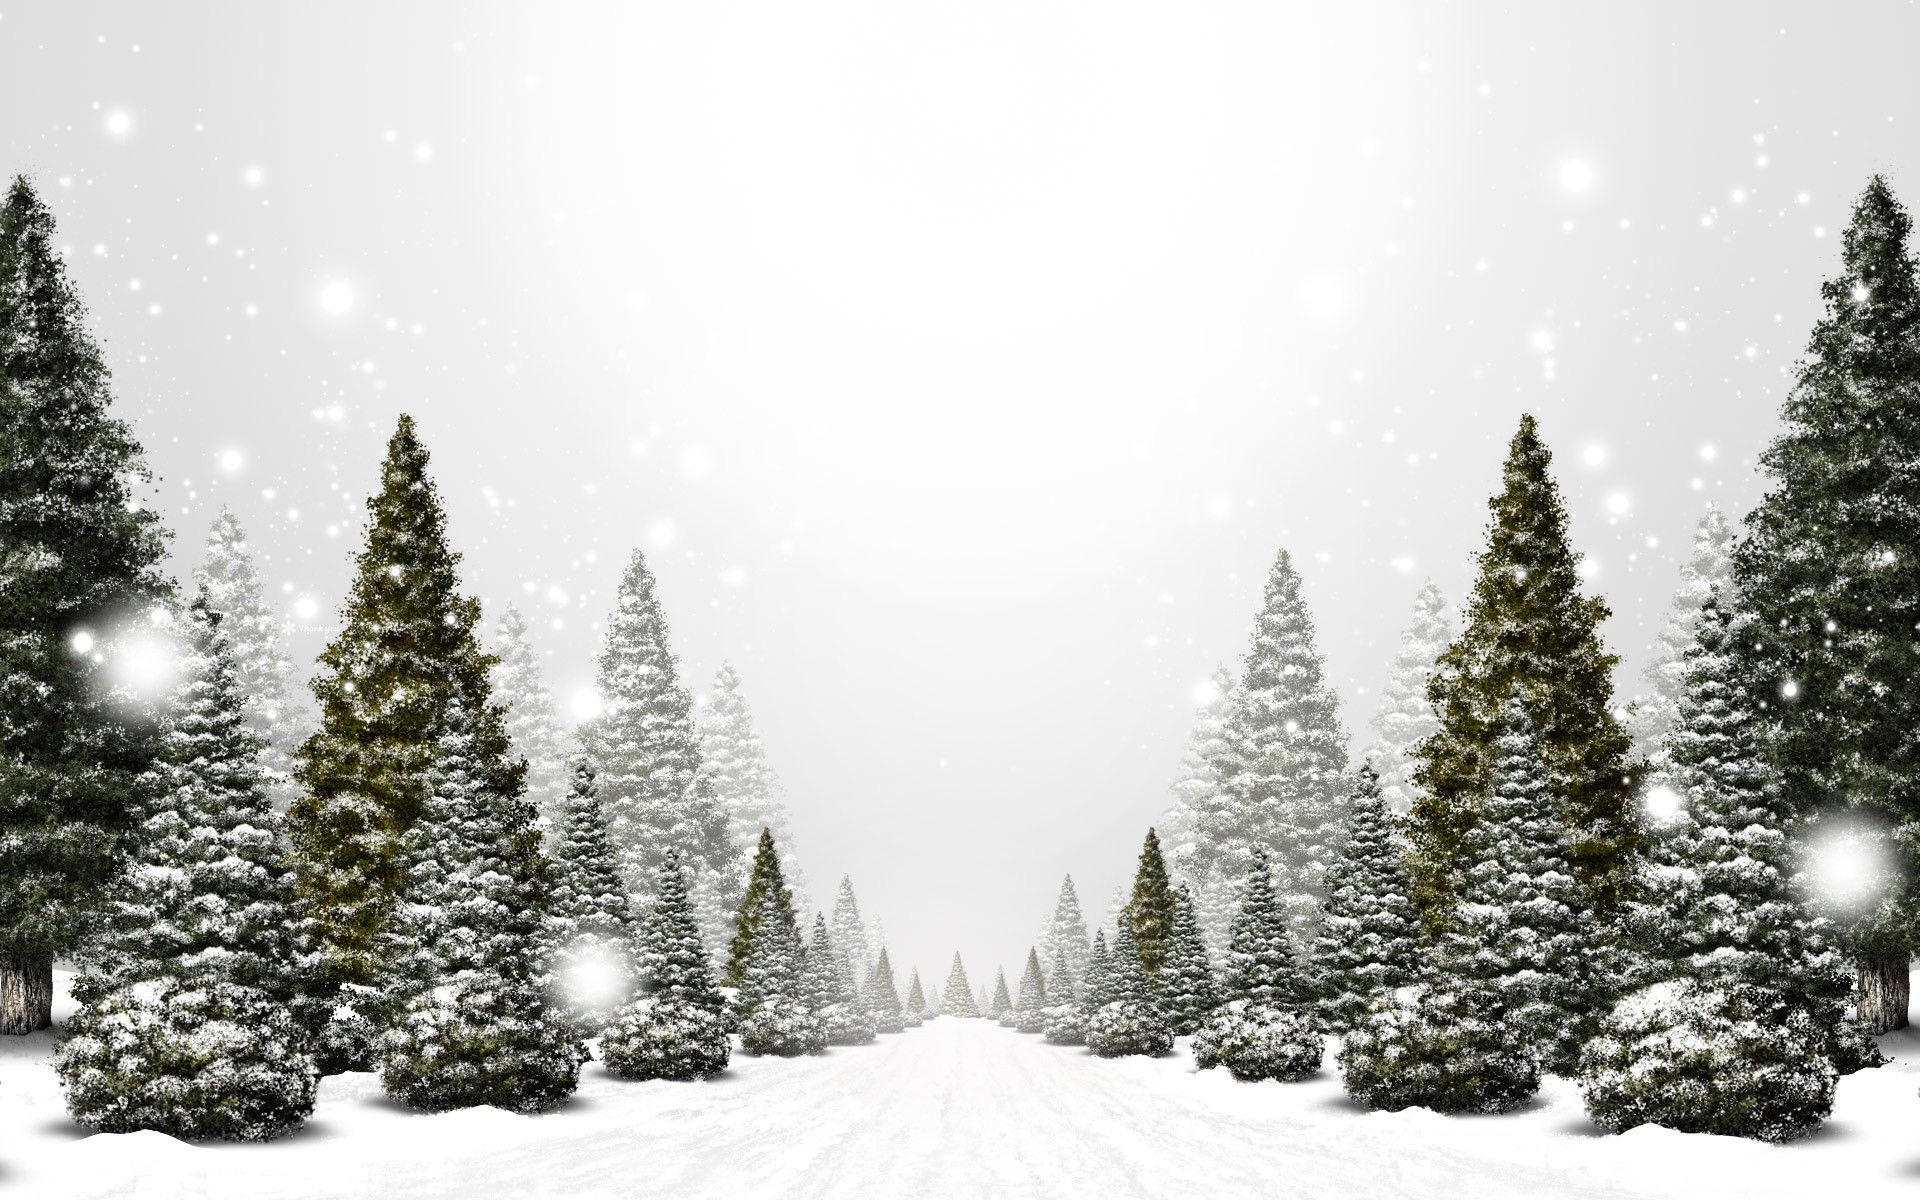 Winter Christmas HD Backgrounds 3719 - HD Wallpapers Site